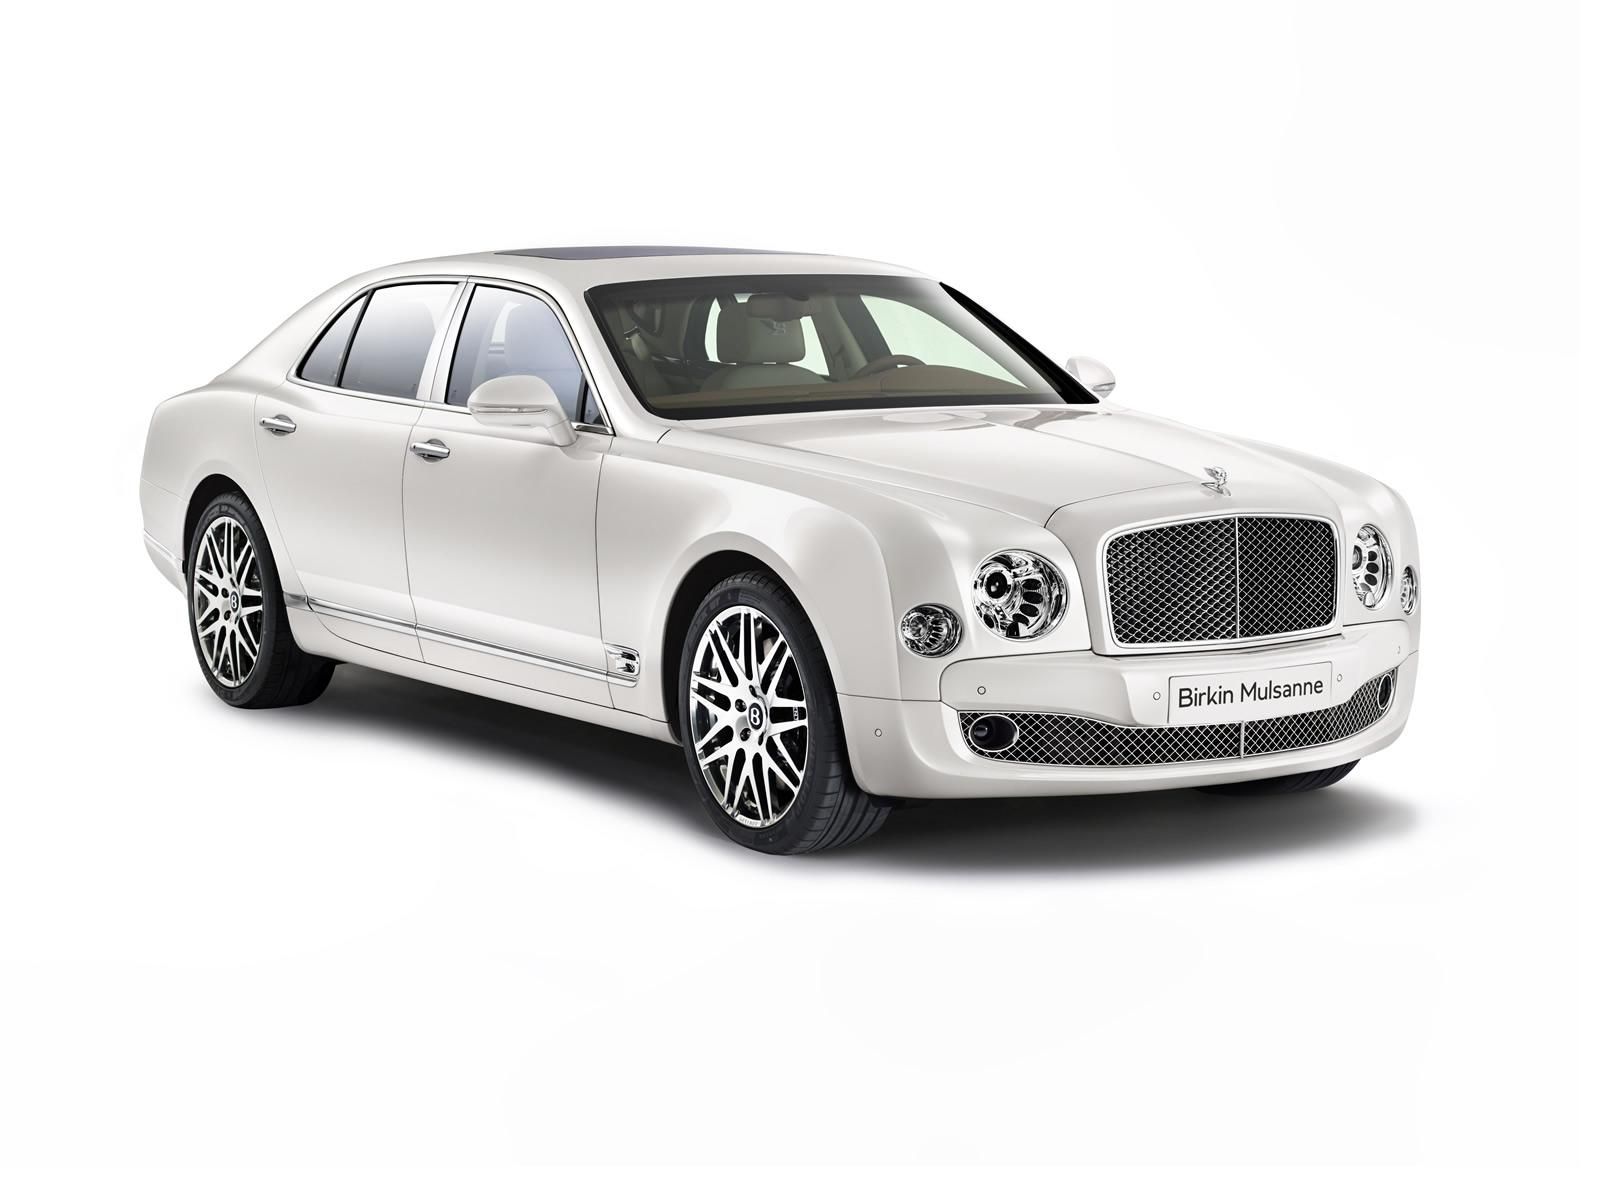 BENTLEY MULSANNE BRKN LMTED EDTON RESM GALERS